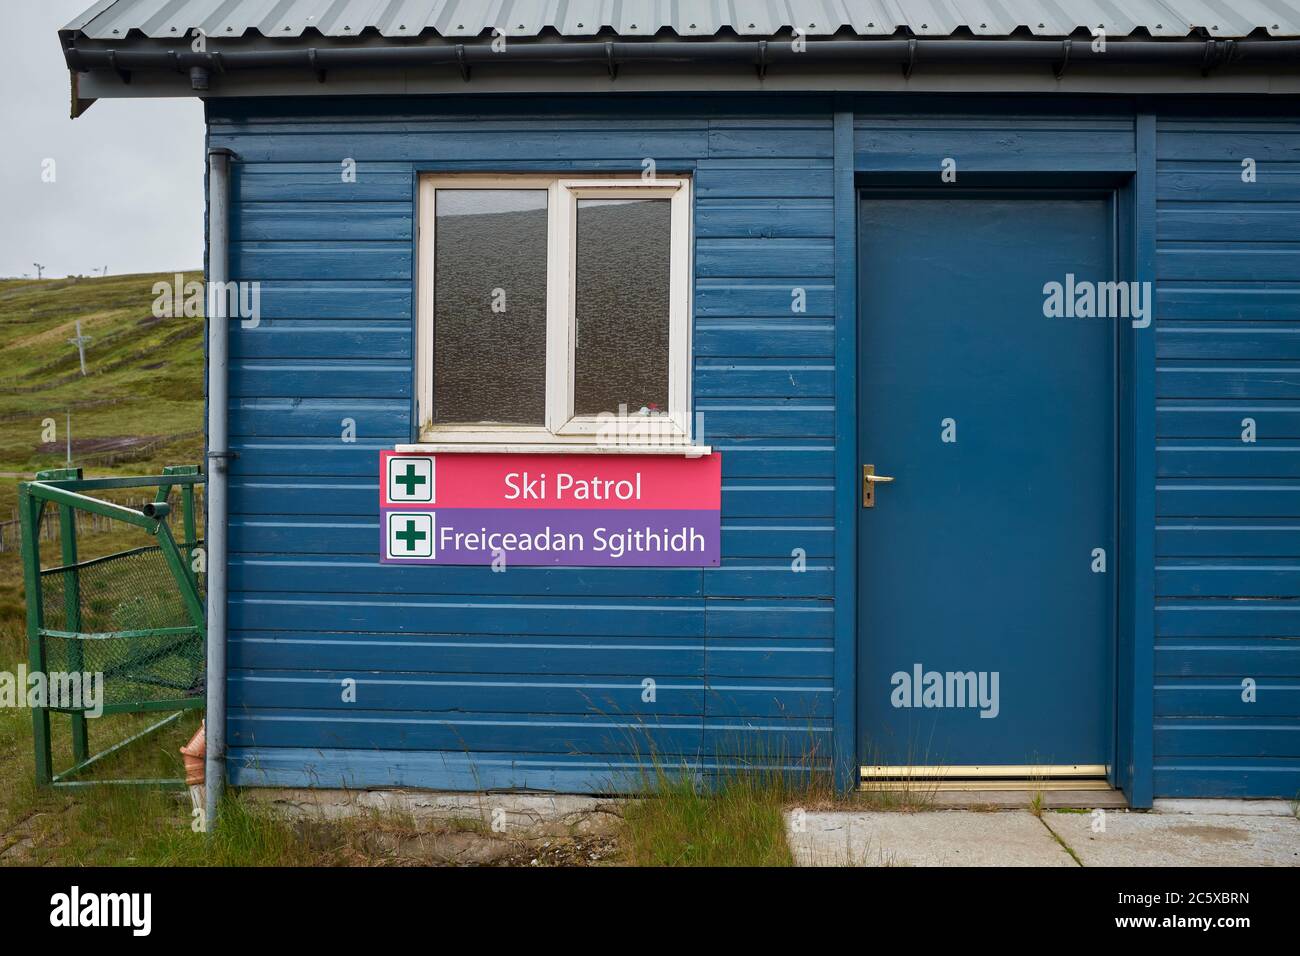 Waiting for winter, during a rainy July and out of season, the Ski Patrol and First Aid Centre is closed at the Lecht Ski Centre Stock Photo